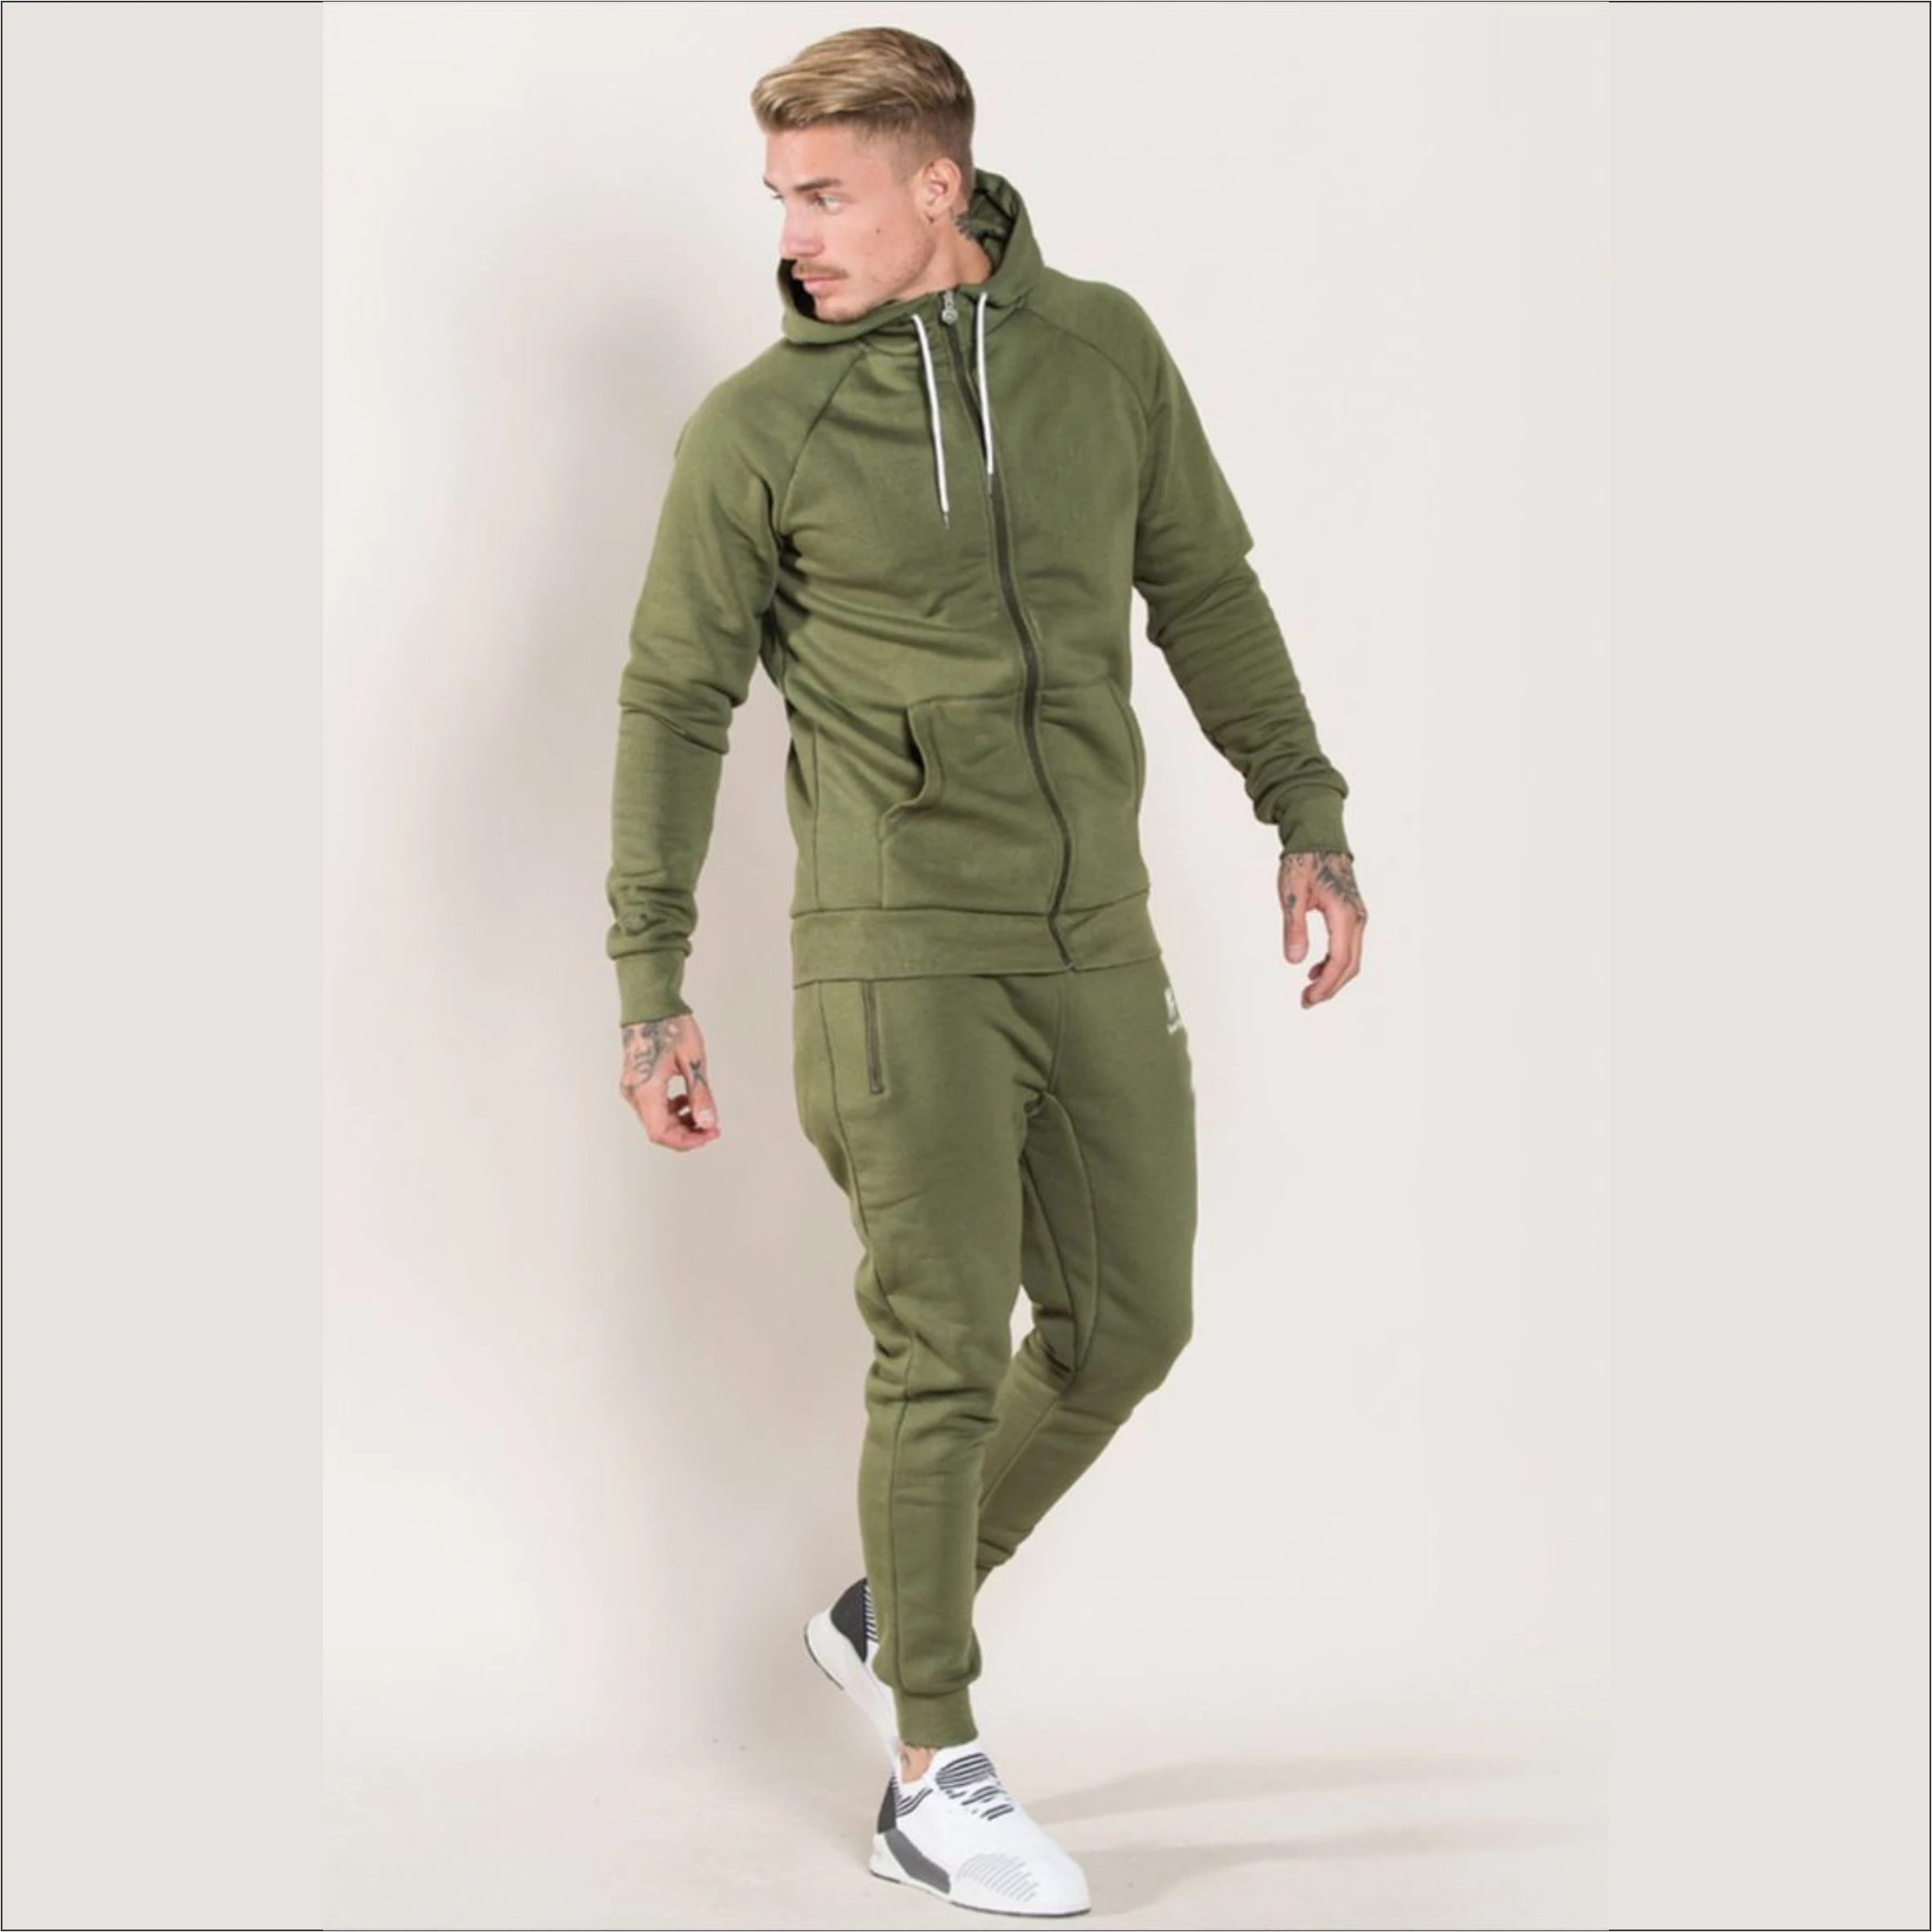 Army Green Comfy Hooded Tracksuit Set with Zipper – COMFY TRENDS los angeles